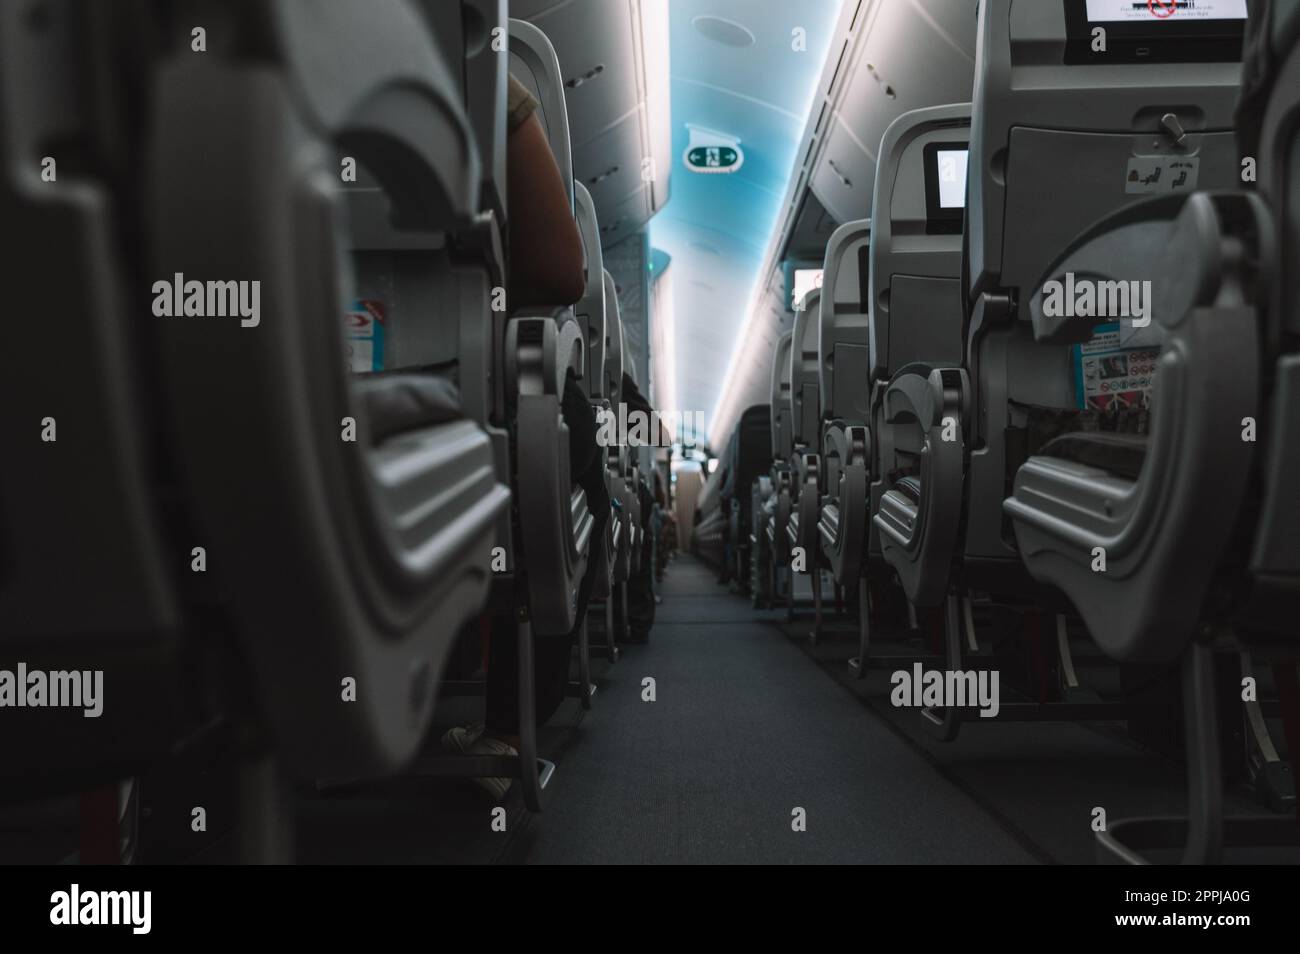 Aircraft interior with aisle and airplane seats Stock Photo